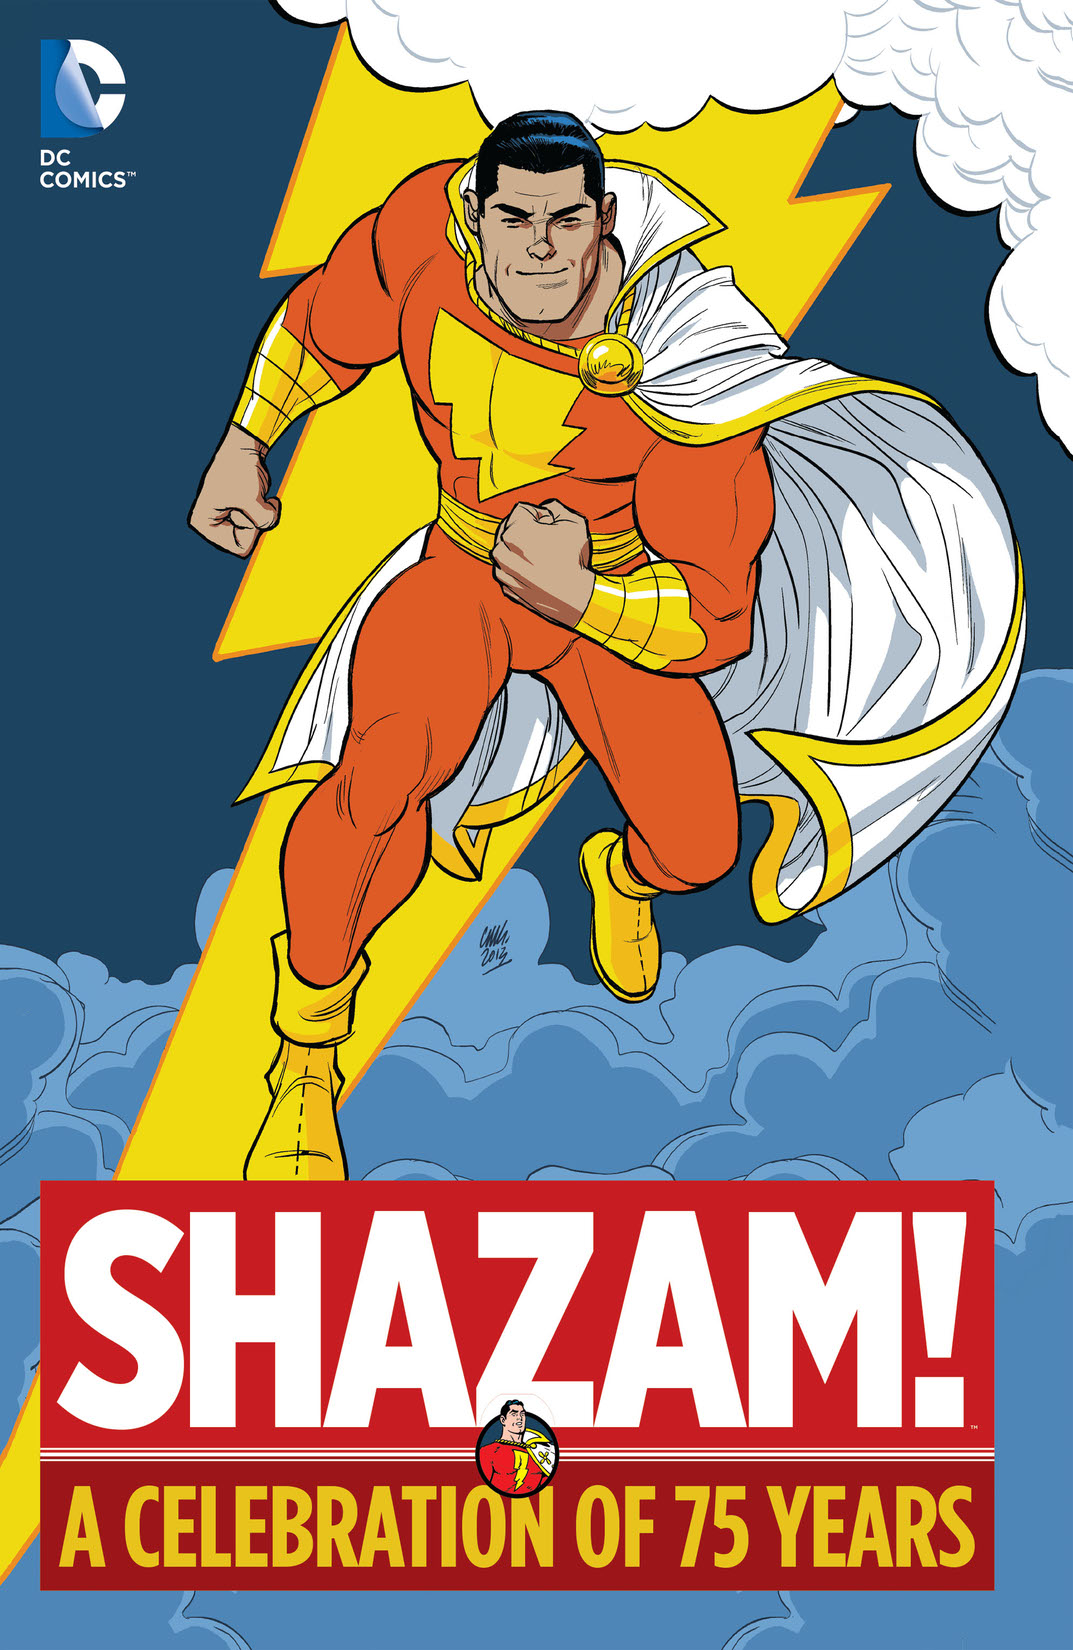 Shazam!: A Celebration of 75 Years preview images